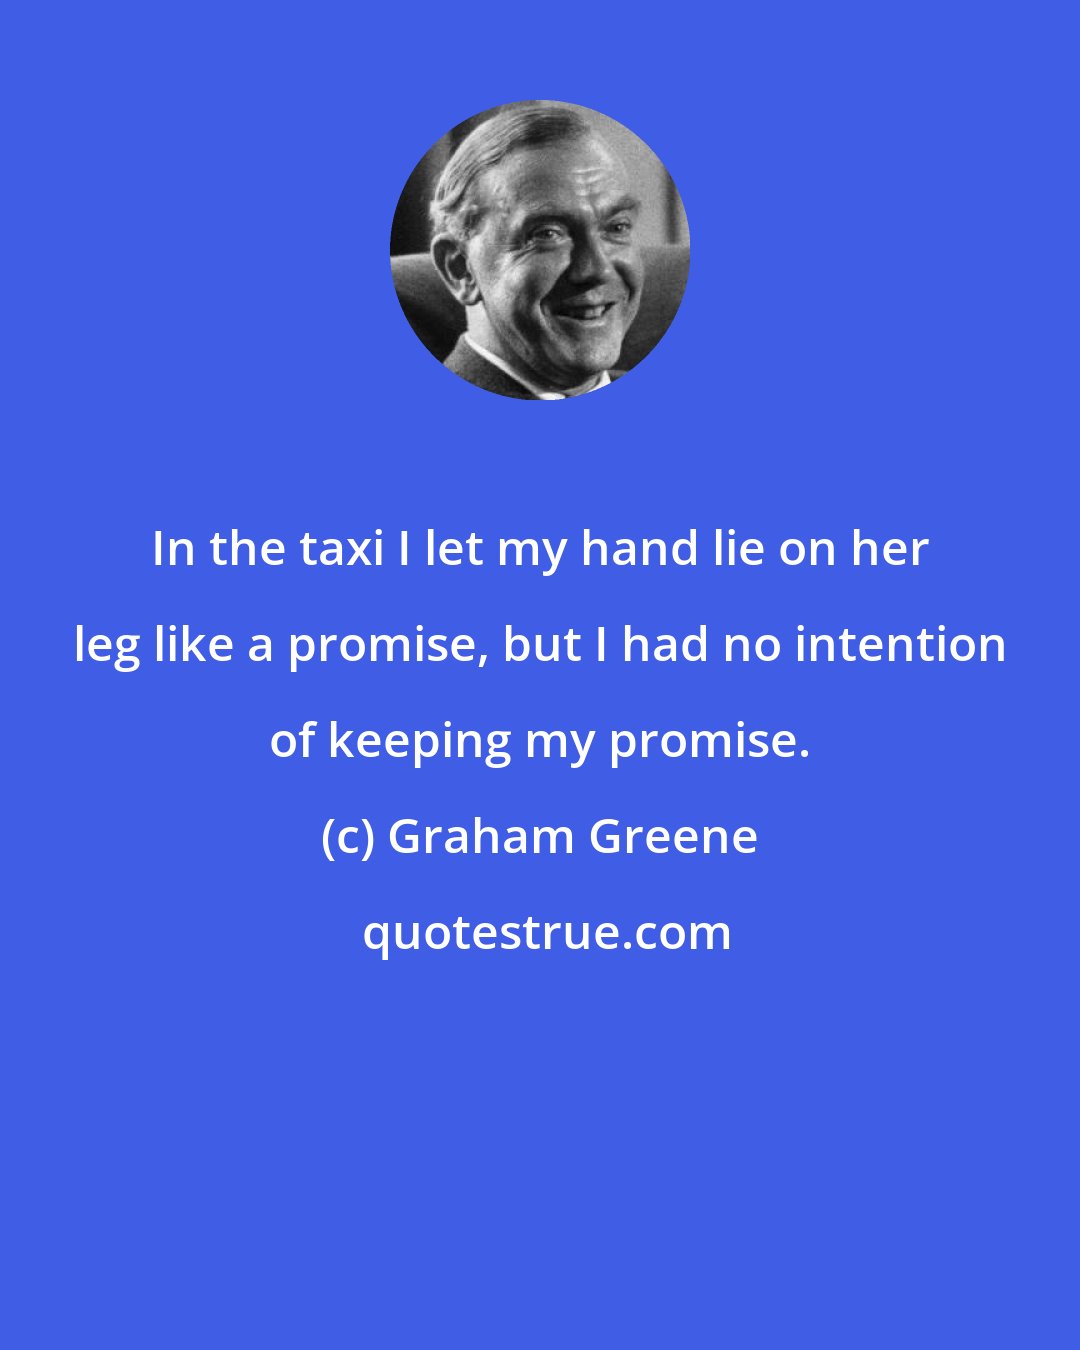 Graham Greene: In the taxi I let my hand lie on her leg like a promise, but I had no intention of keeping my promise.